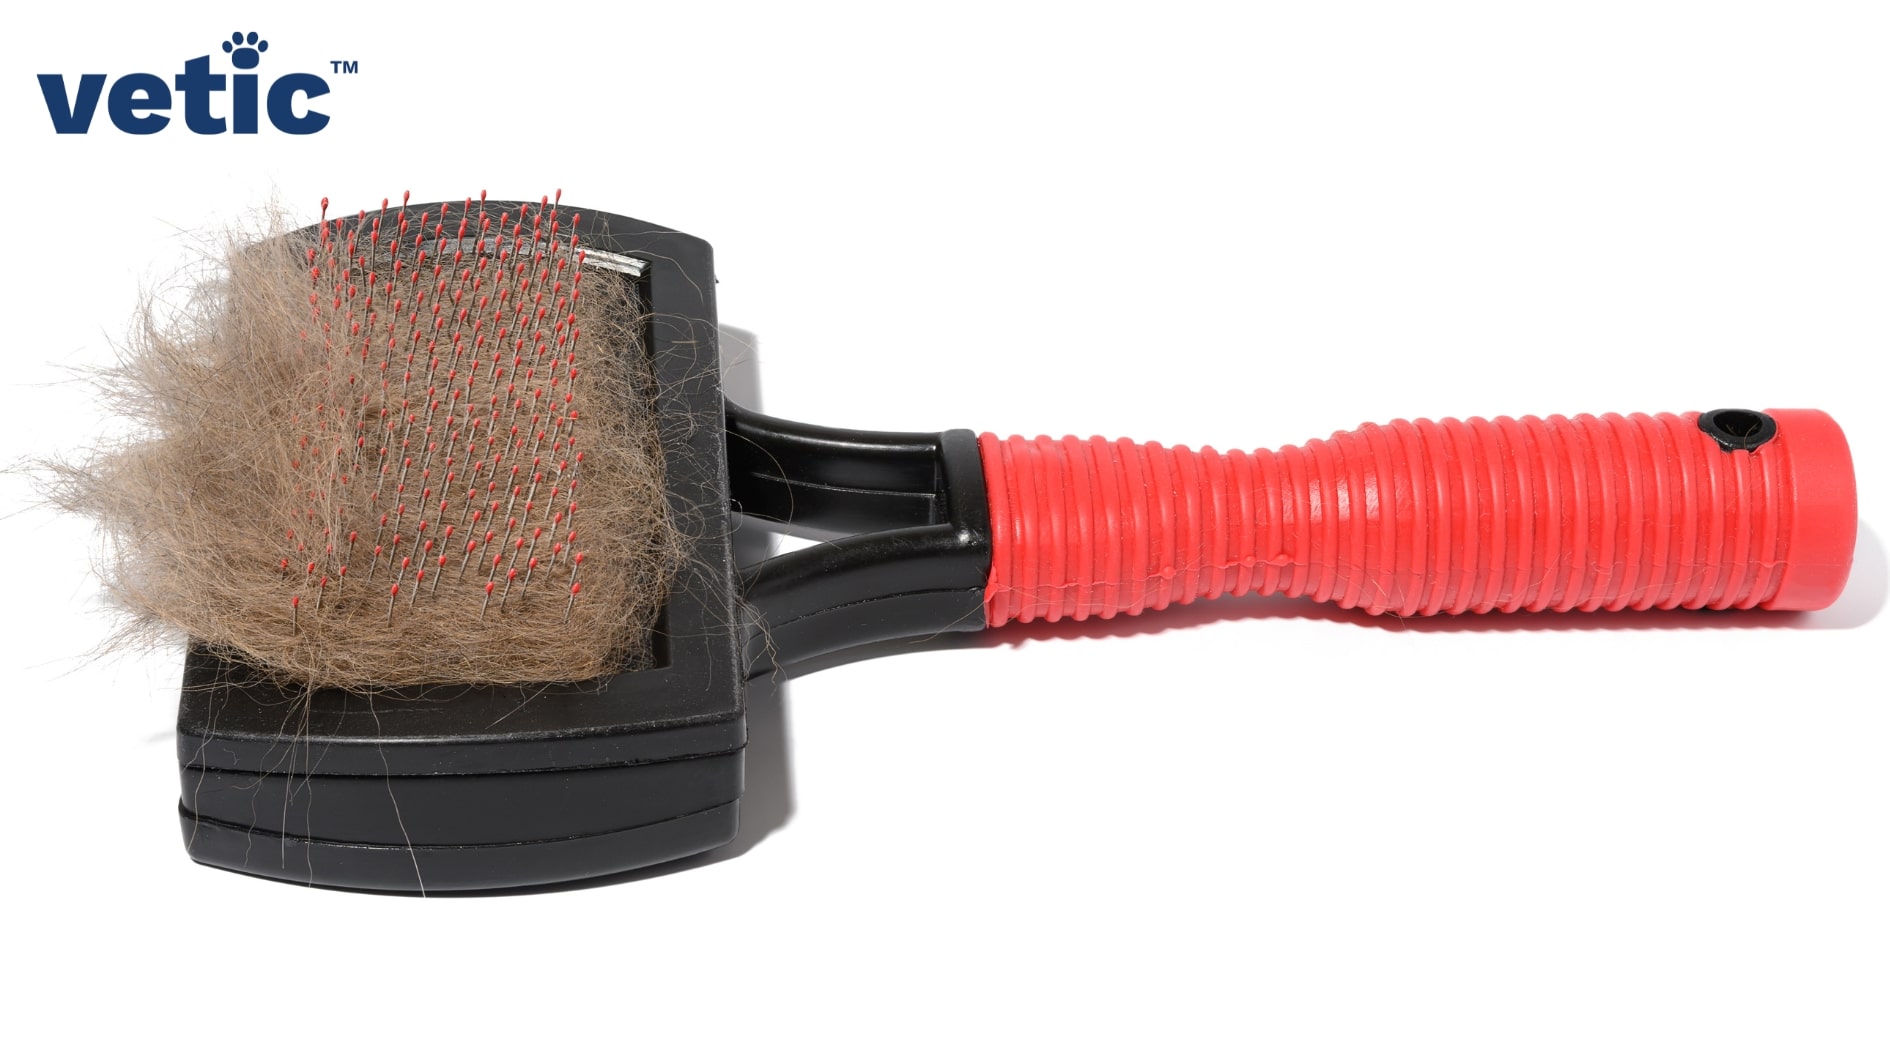 The photo of a regular deShedding brush with tons of cat hair stuck to the bristles. Shedding in cats can be controlled by investing in such a brush.